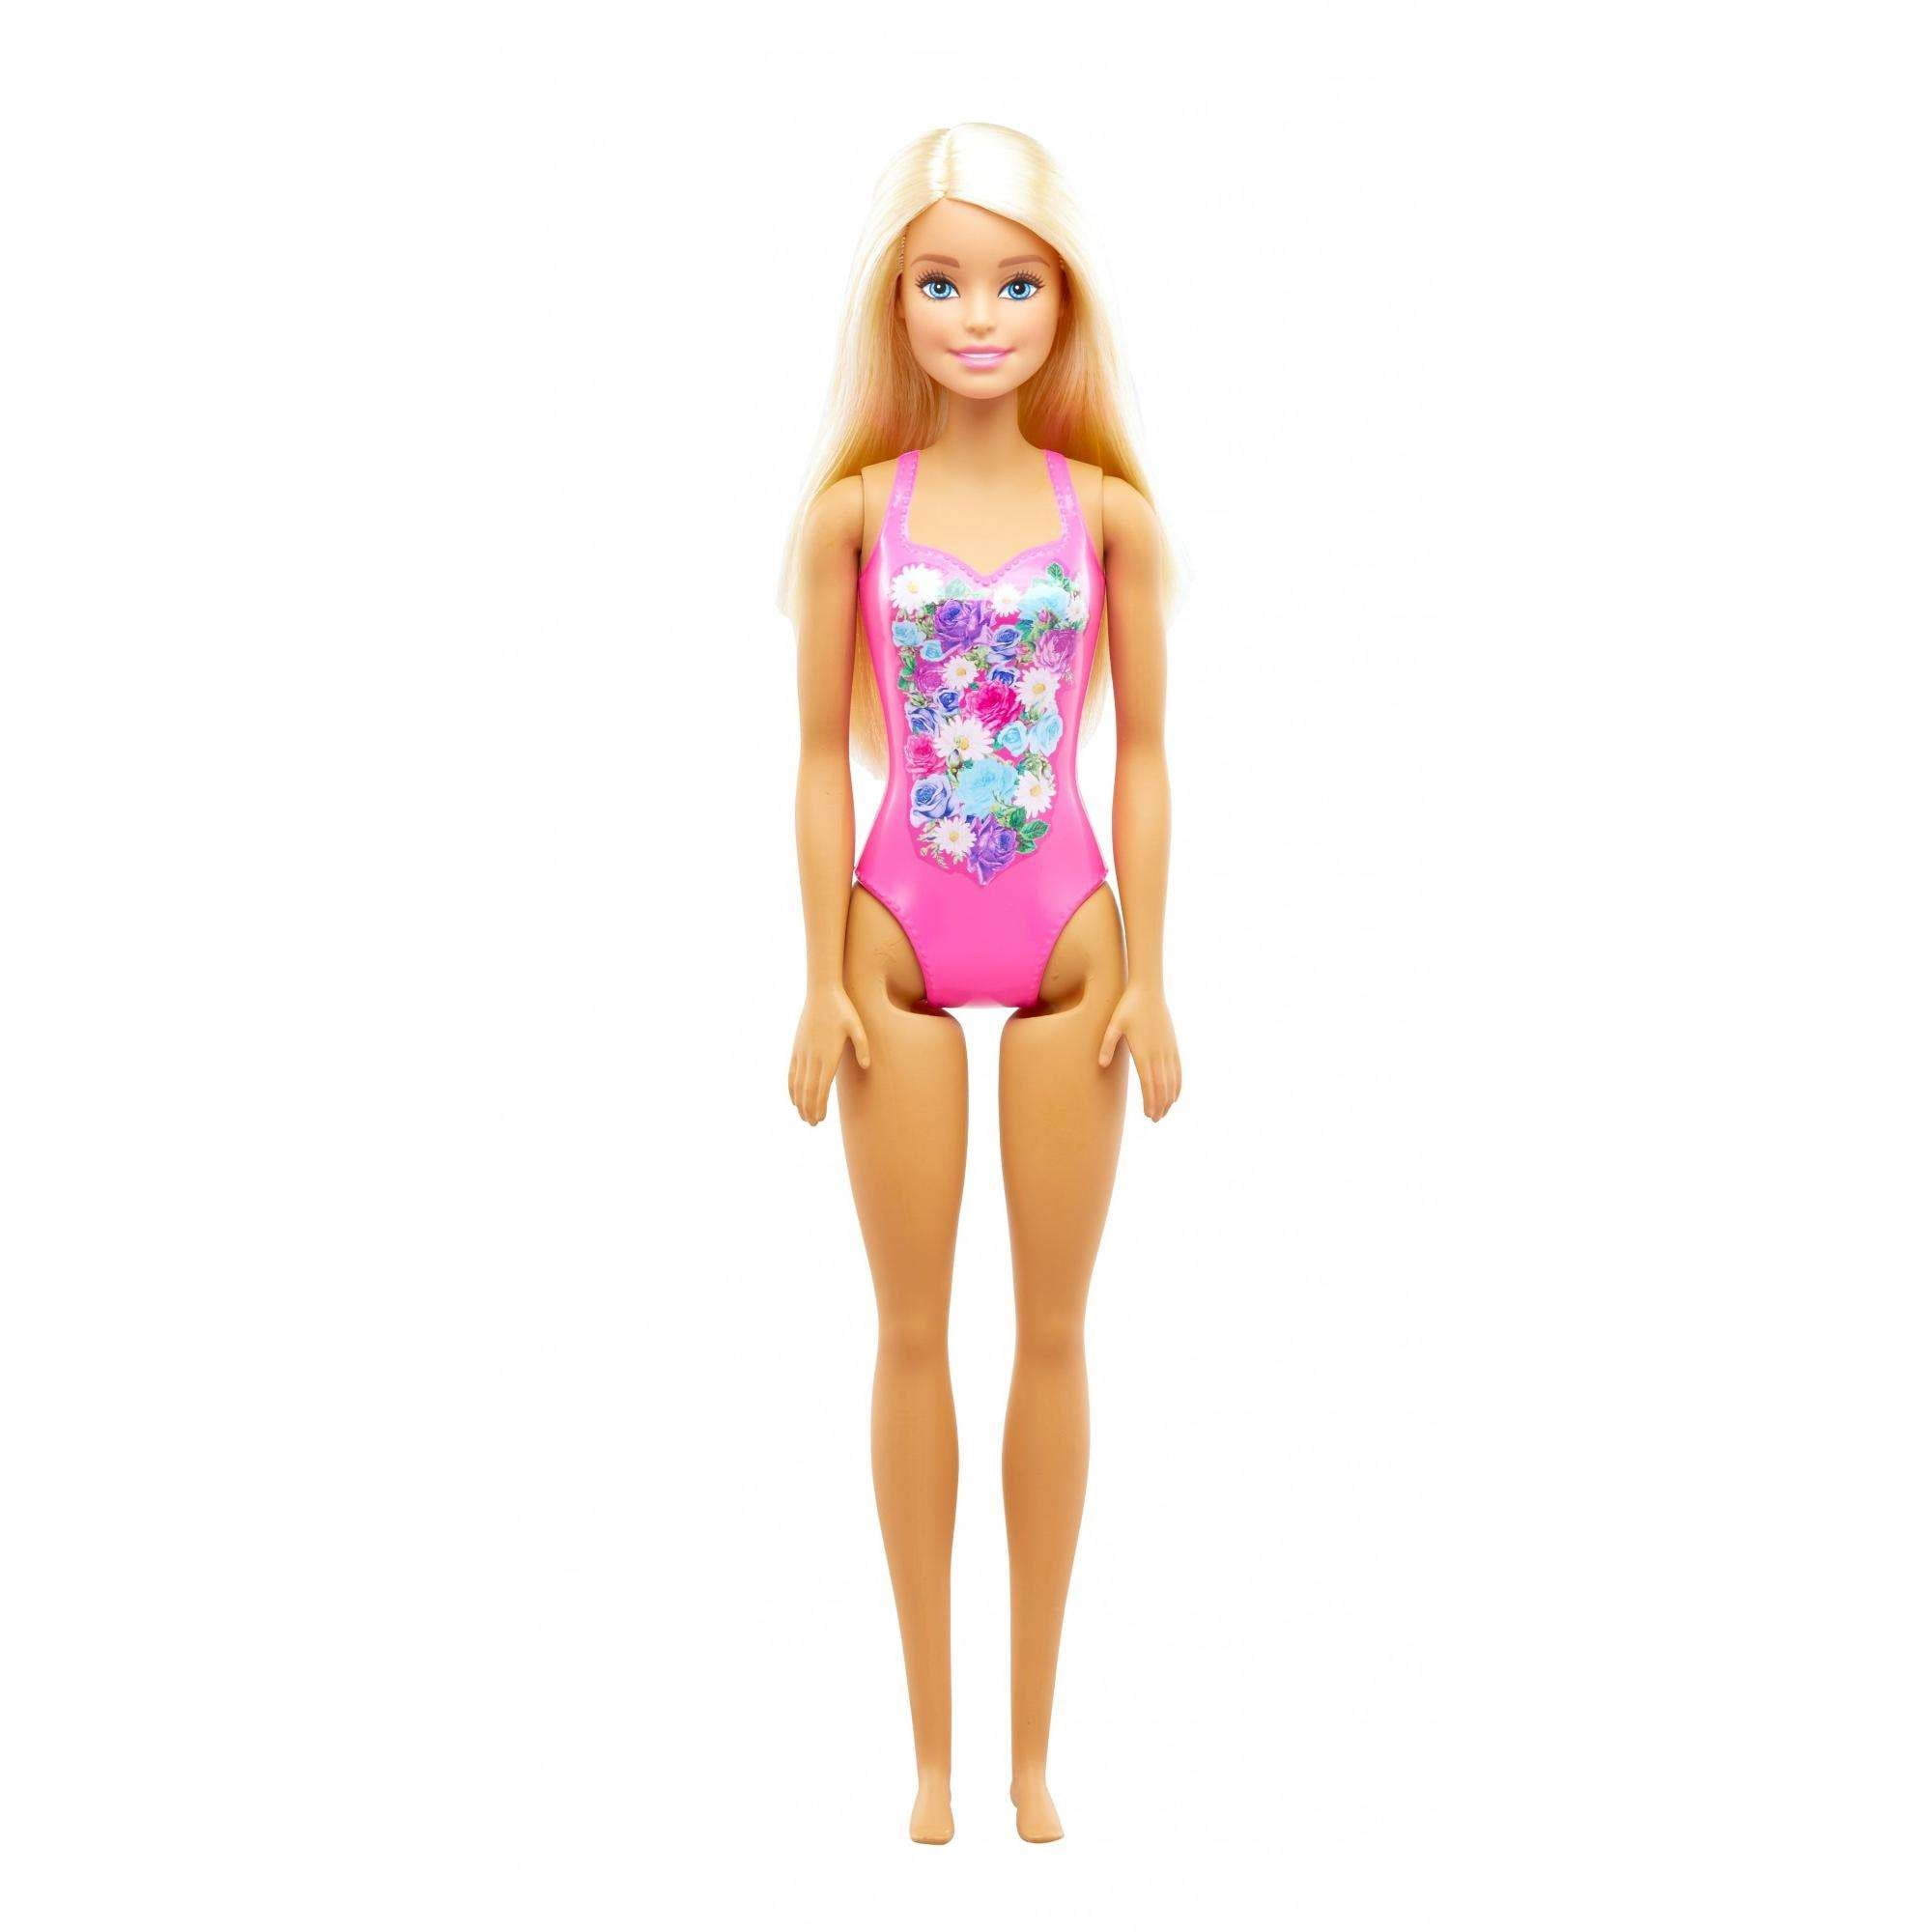 NEW FREE SHIP Barbie Doll Fashion Pack Clothes Lifeguard Swimsuit Shorts Buoy 